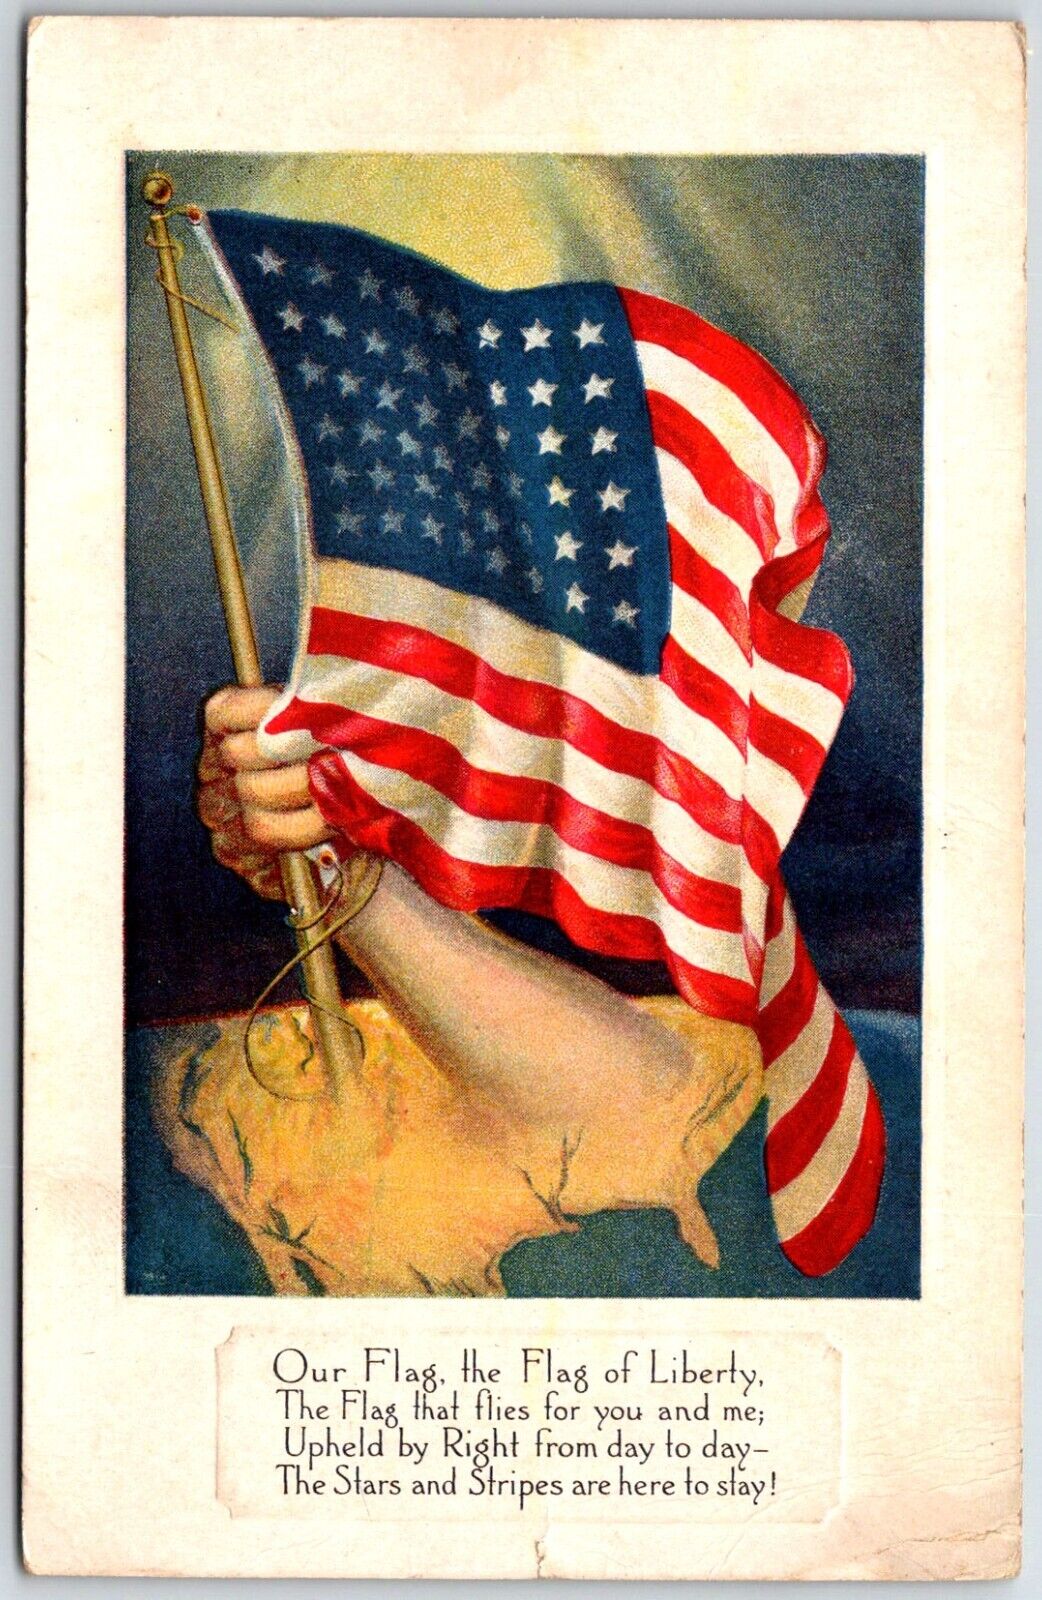 Patriotic Postcard American Flag Held by Hand from United States  1918